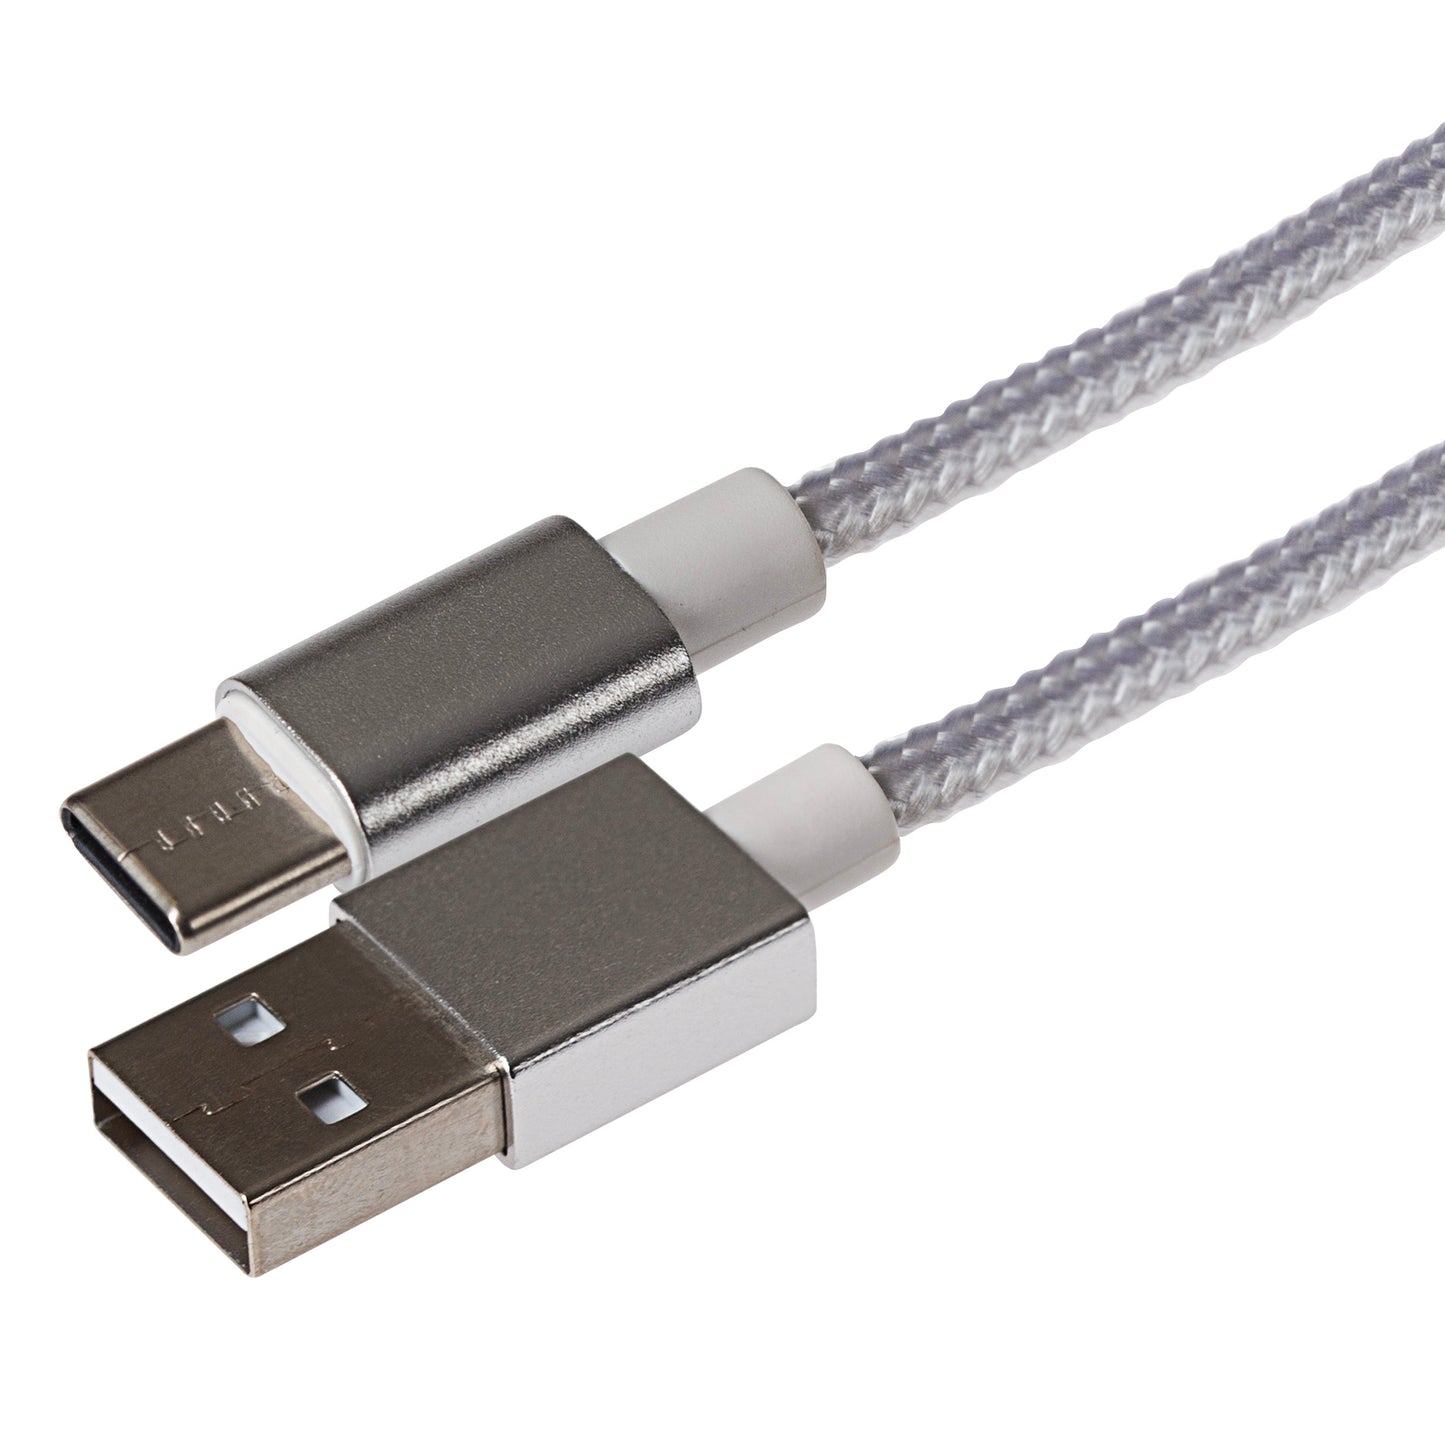 Maplin USB-C to USB-A Braided Cable - Silver, 1m - maplin.co.uk